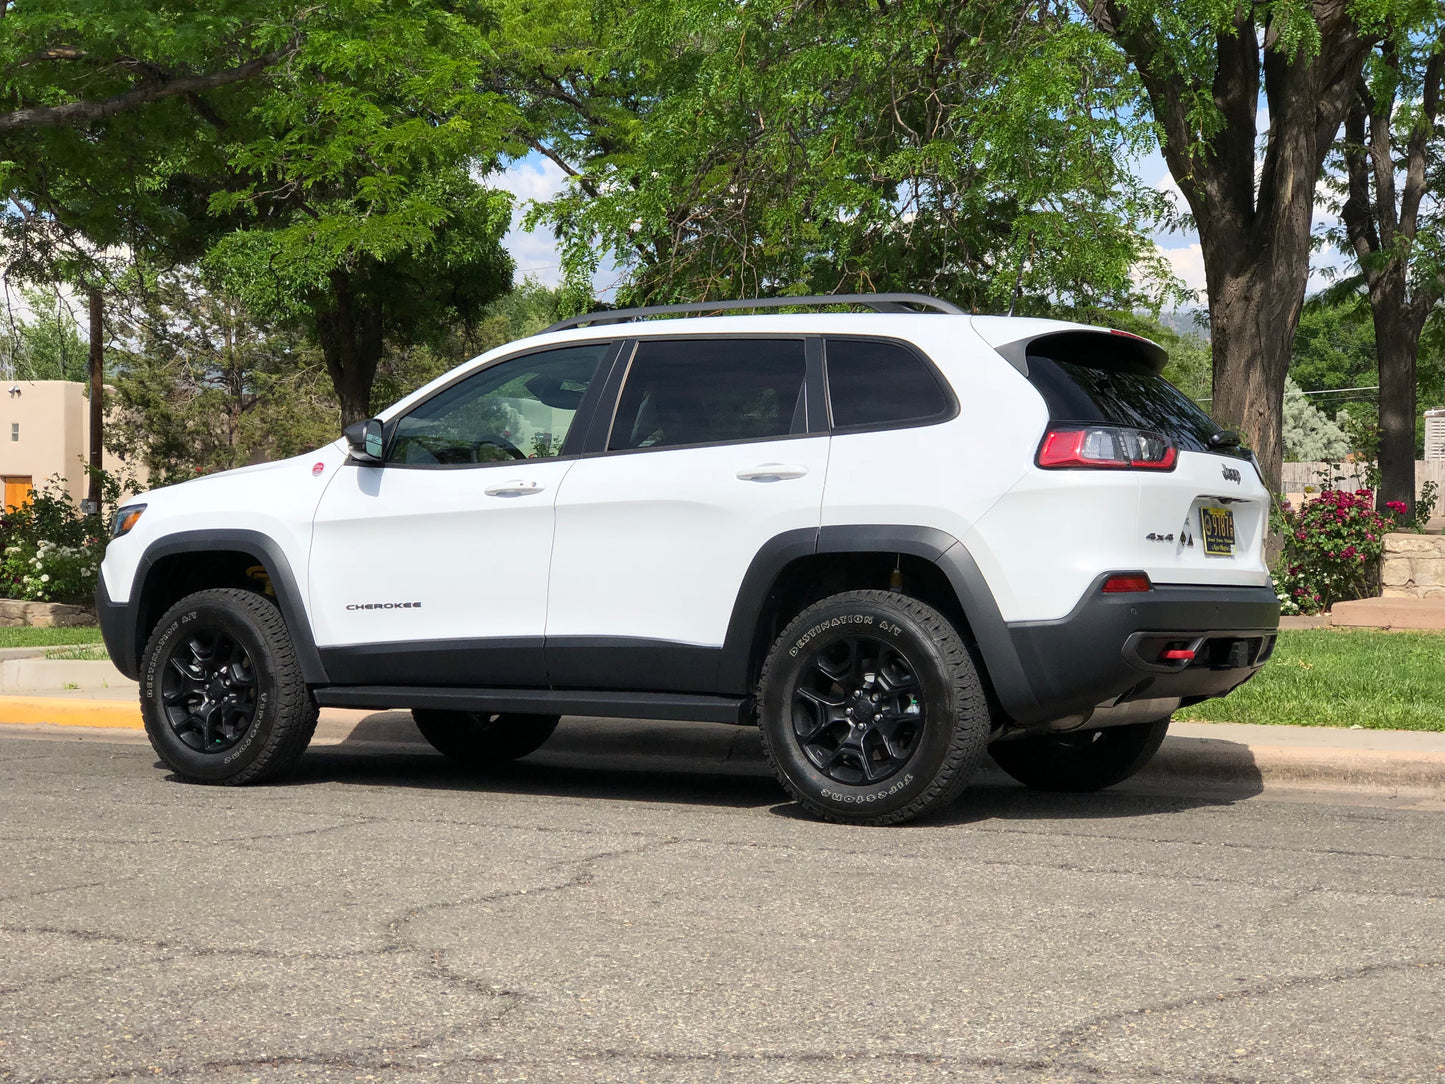 Dobinsons Front Lifted Coils for 4X4 (30mm Lift) - Over Trailhawk AD2 Platform Suspension 110Kg Accessories Jeep Cherokee KL 2014 to 2022 Sport, Latitude and Trailhawk(C29-150)